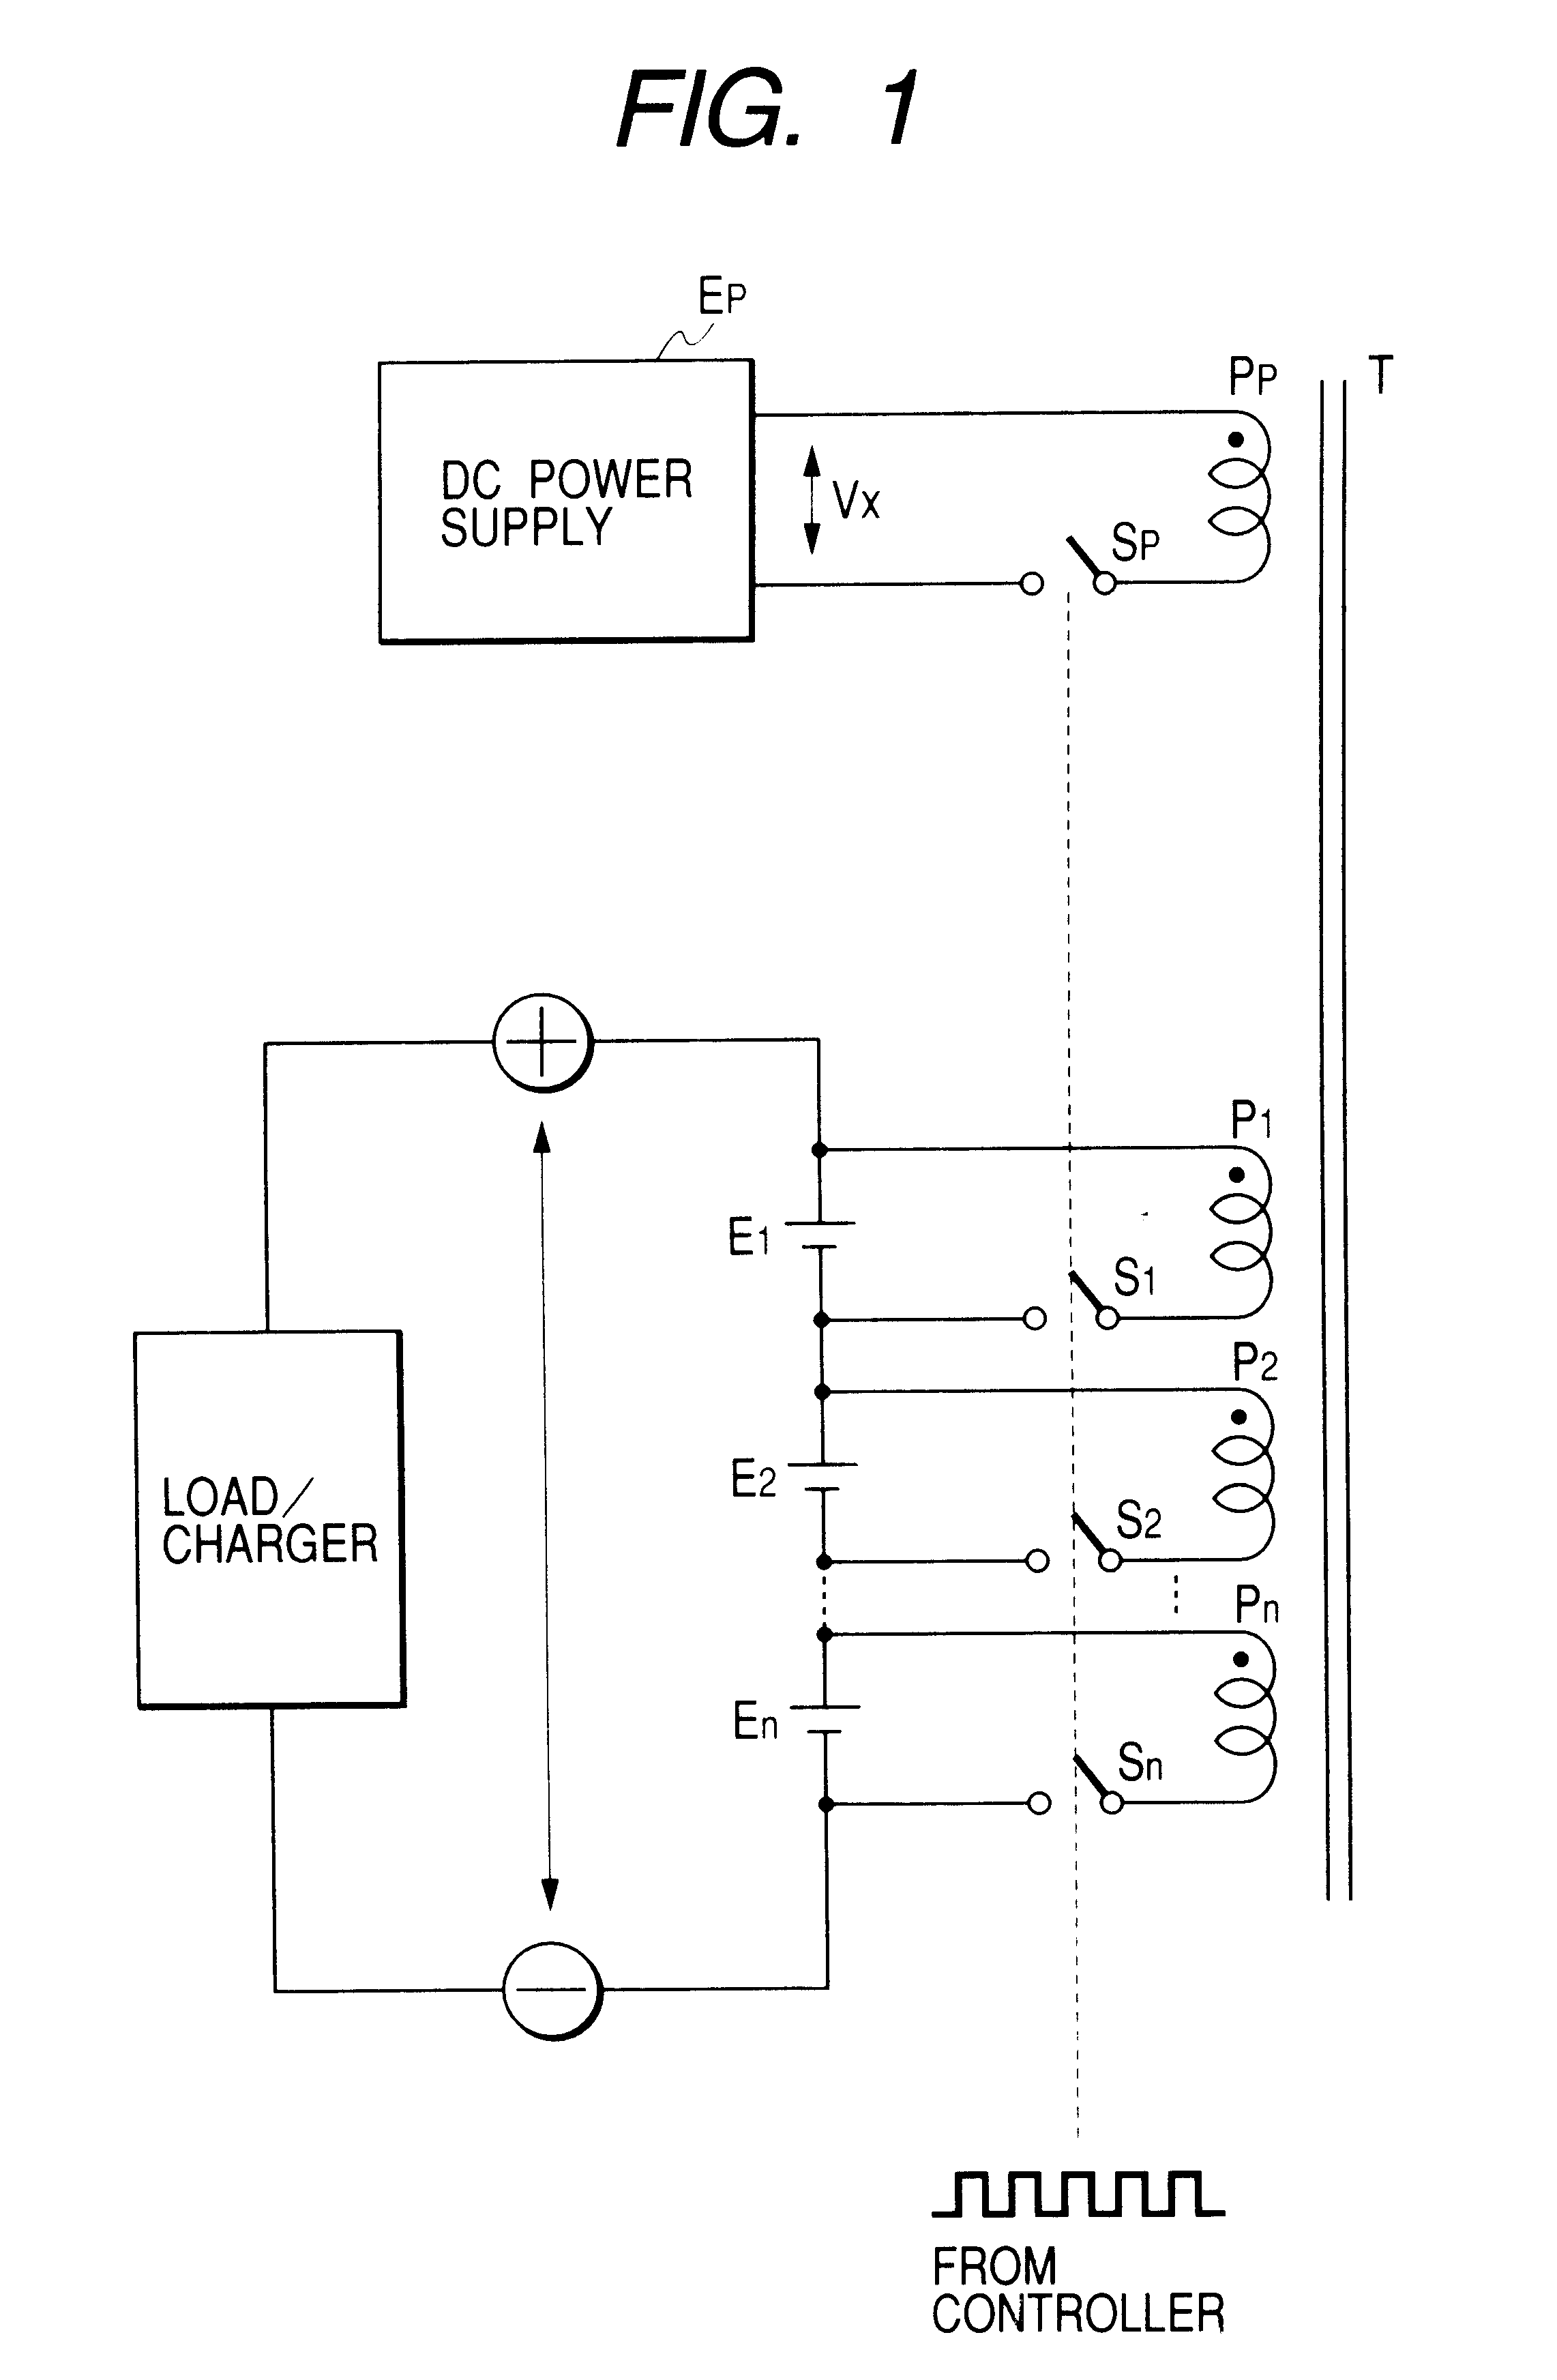 Voltage equalizer apparatus and method thereof